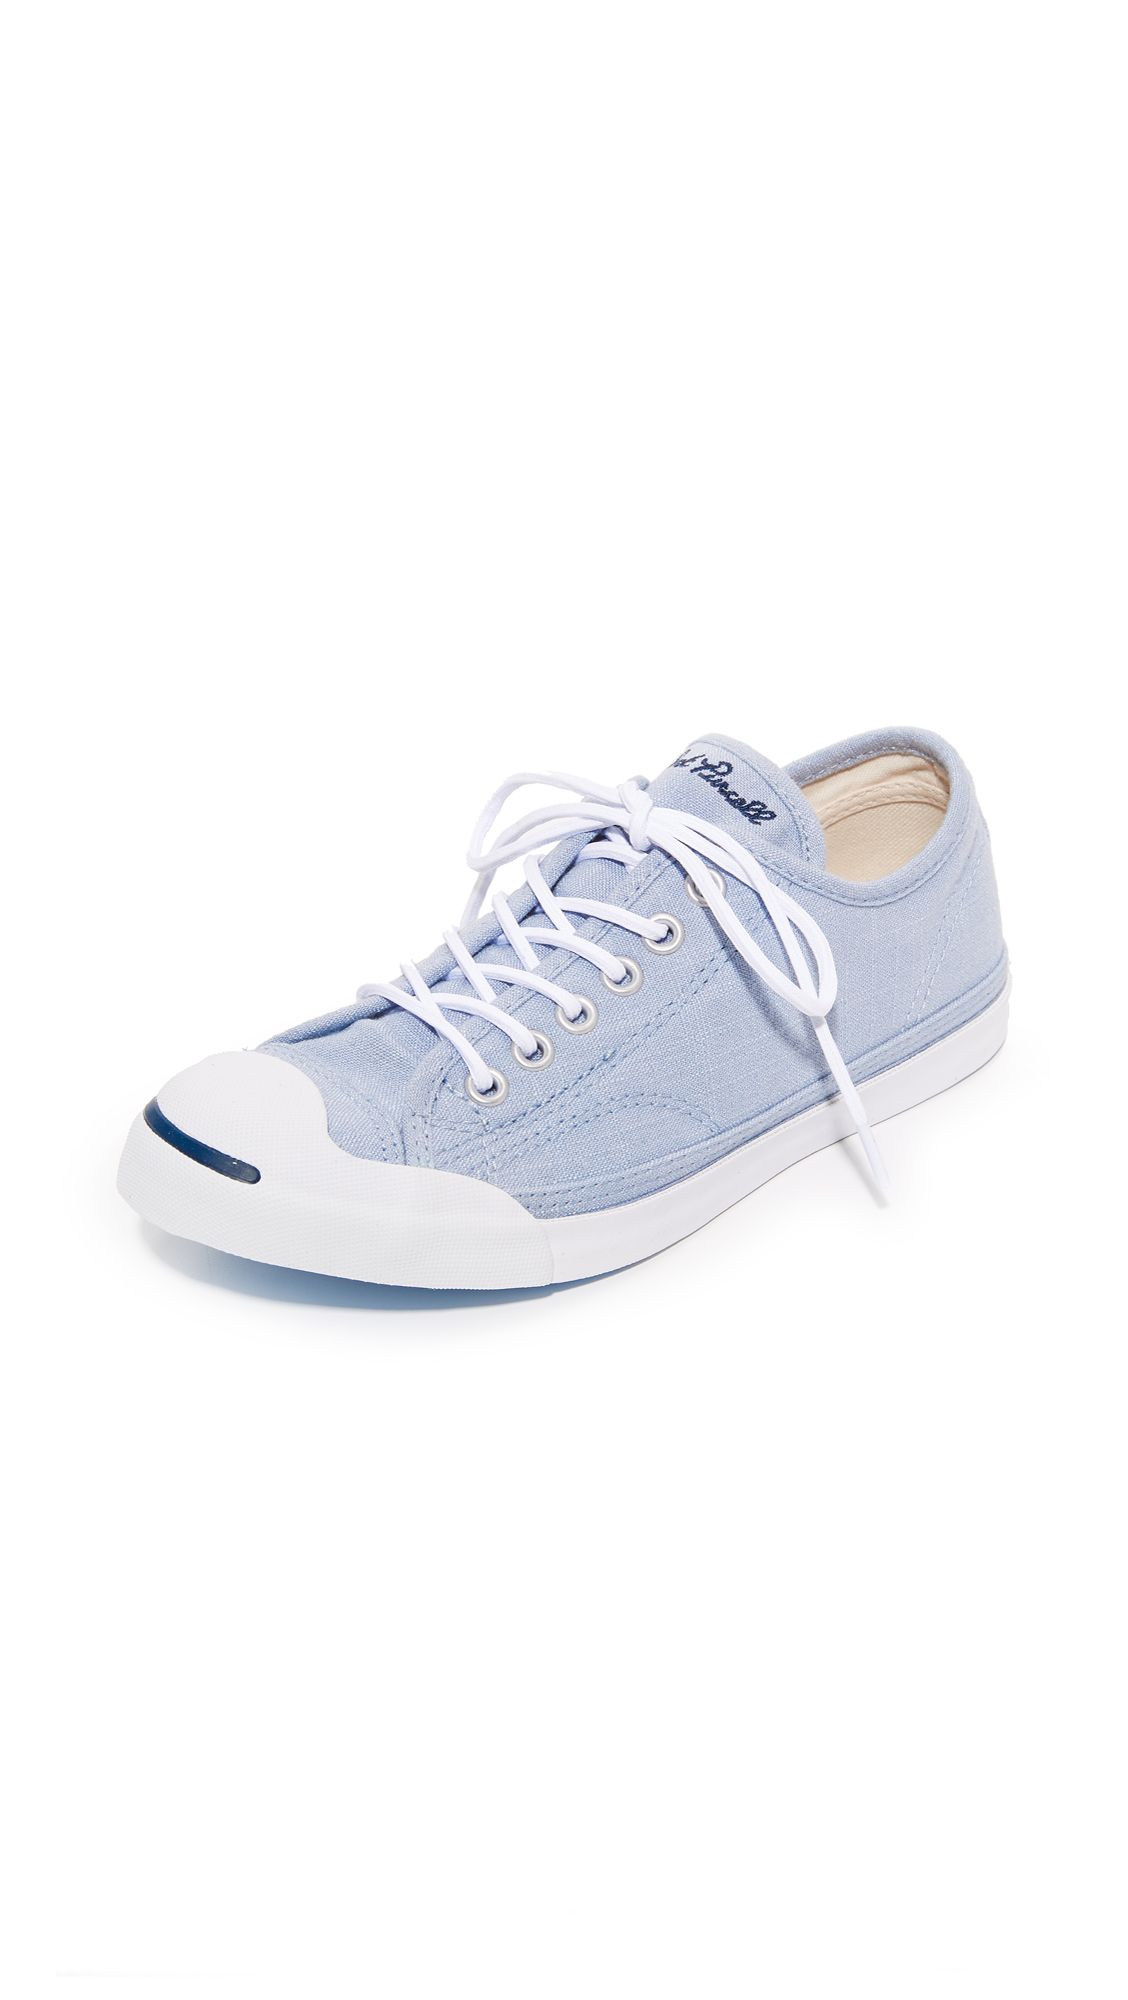 Jack Purcell LP OX Sneakers | Shopbop